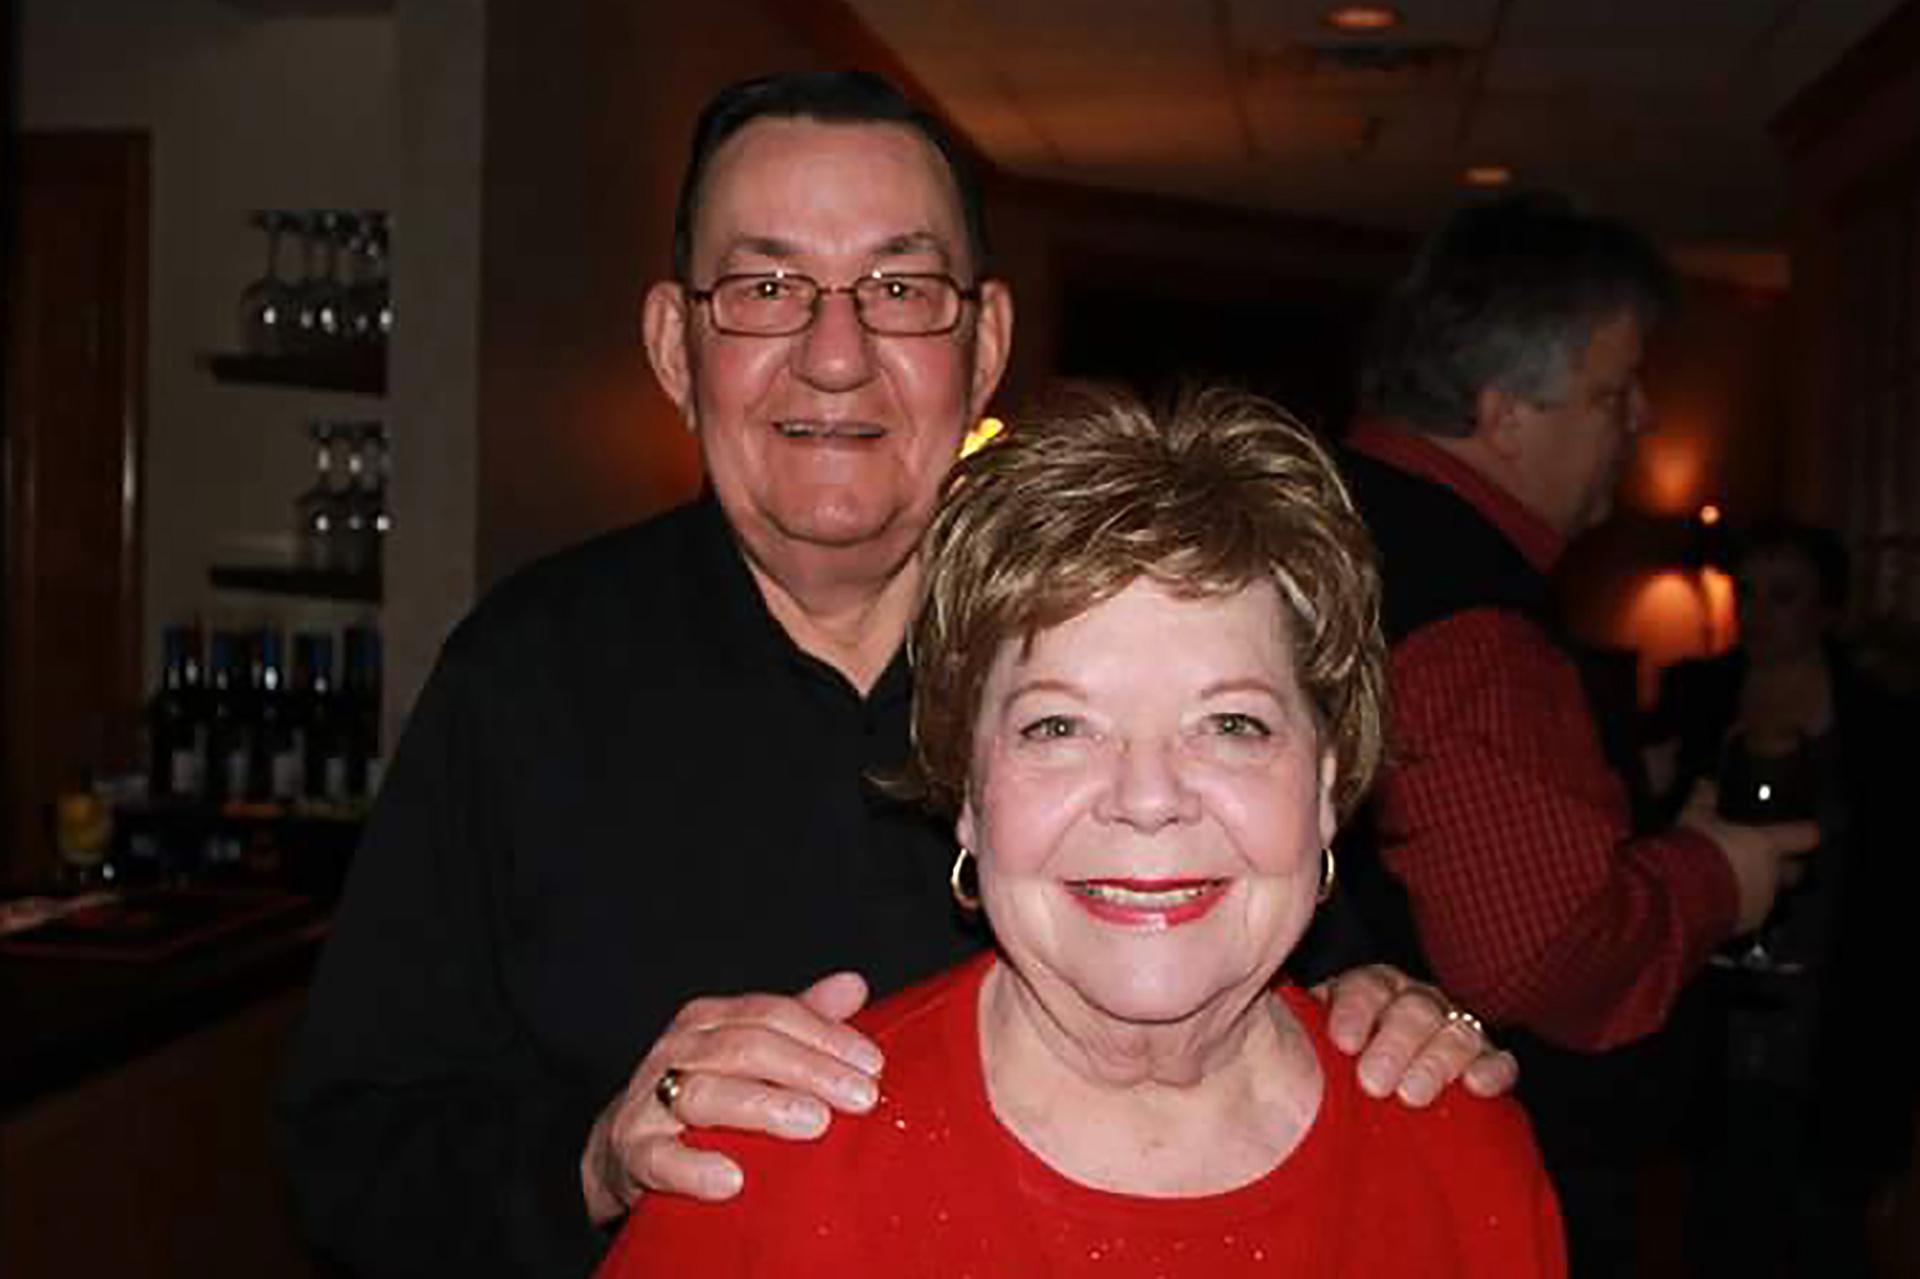 In this 2011 family photo provided by Dawn Bouska, Charles Recka and his wife, Patricia Recka, pose for a photo at a banquet in Naperville, Illinois. Charles Recka died on March 12, 2020. (Courtesy of Dawn Bouska via AP)